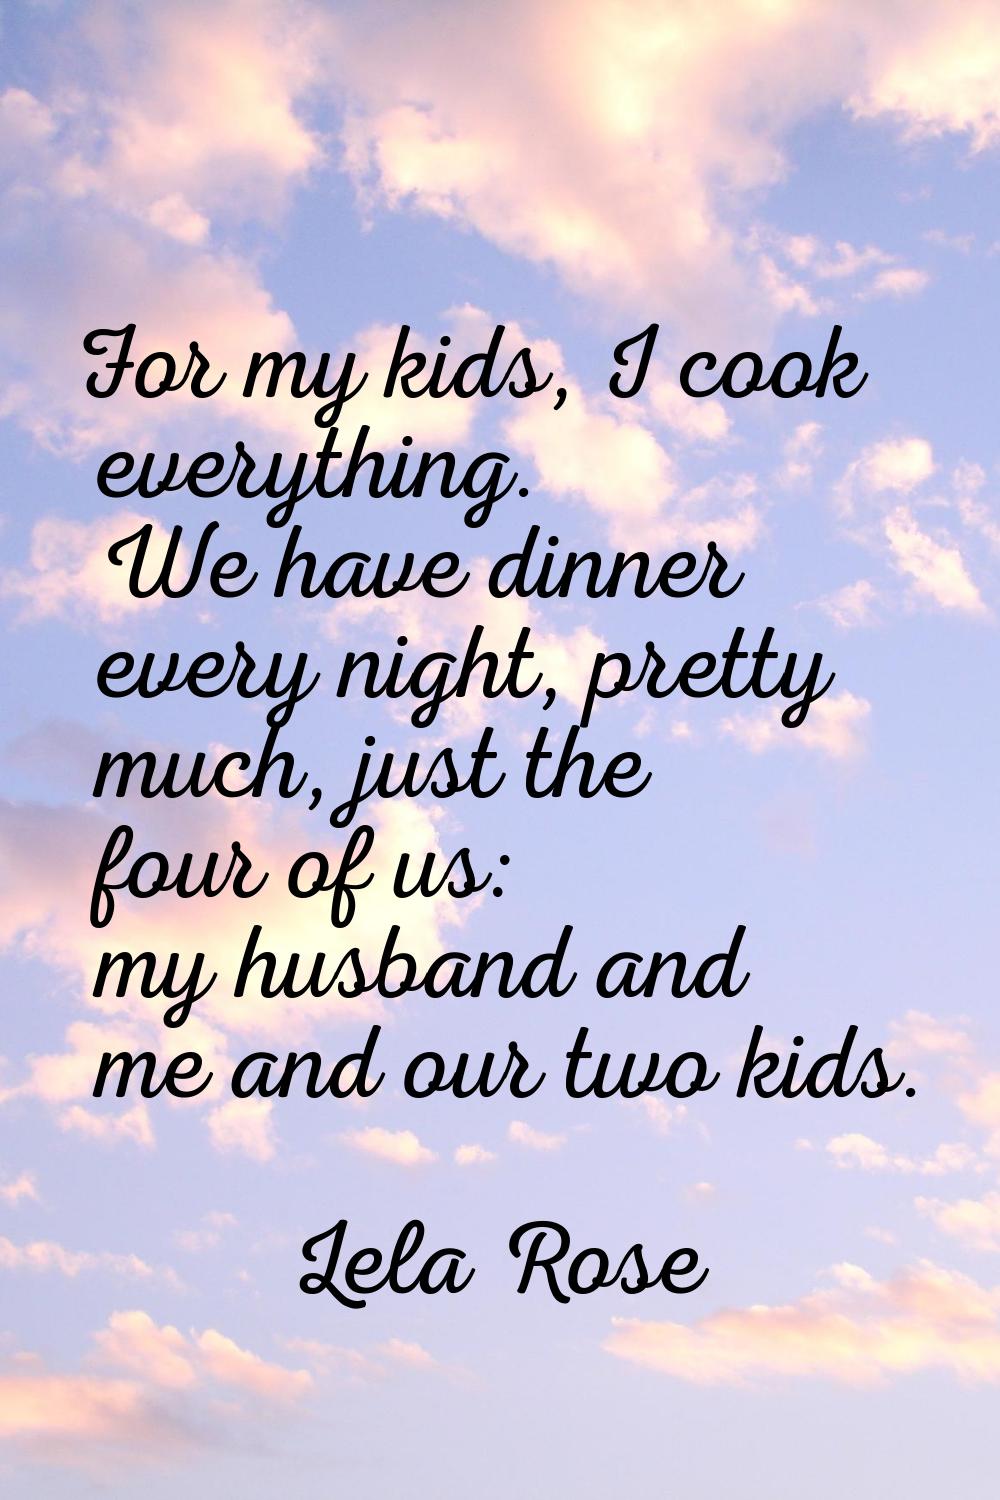 For my kids, I cook everything. We have dinner every night, pretty much, just the four of us: my hu